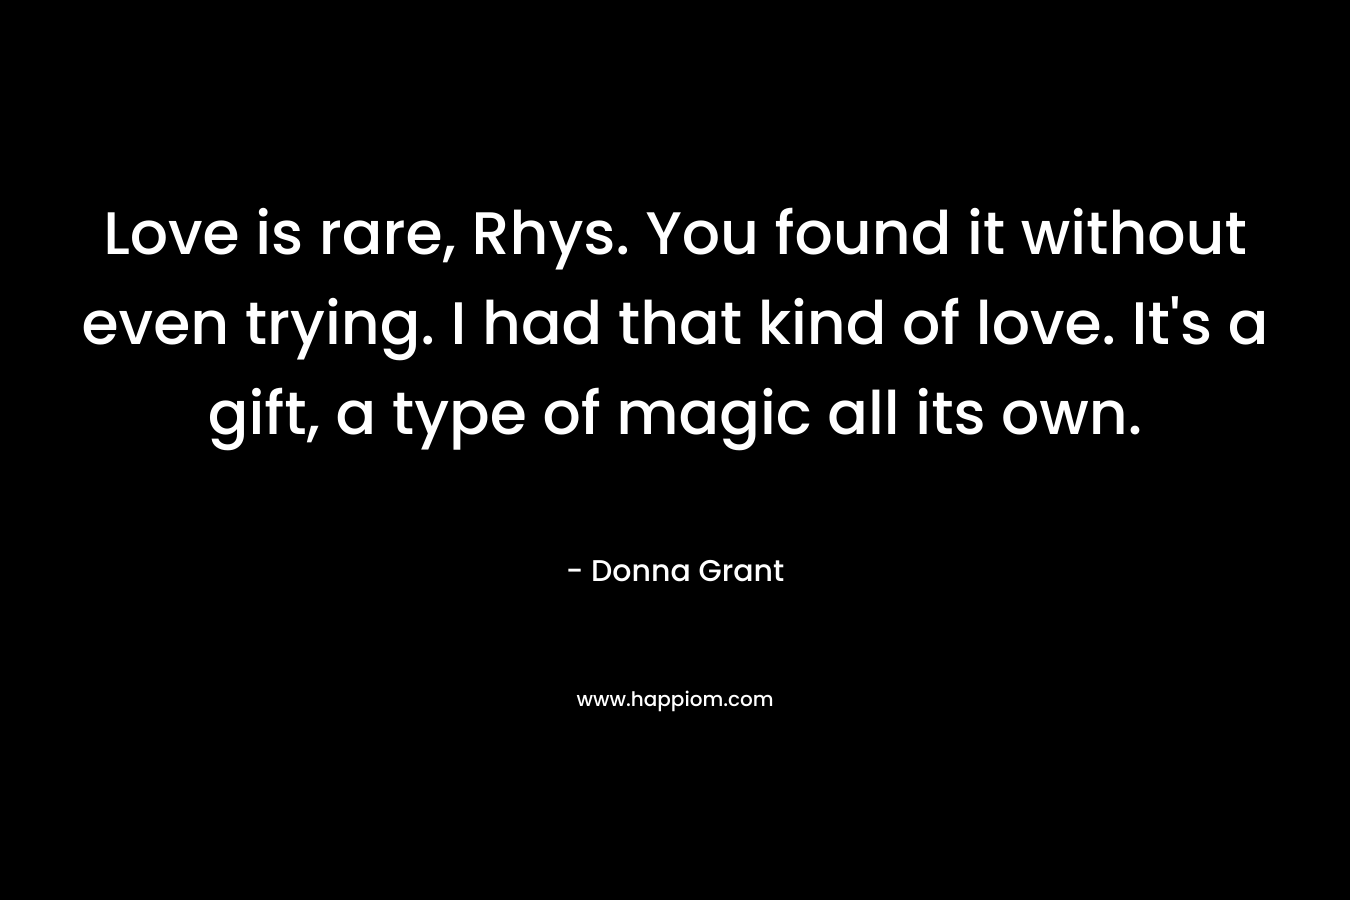 Love is rare, Rhys. You found it without even trying. I had that kind of love. It’s a gift, a type of magic all its own. – Donna Grant